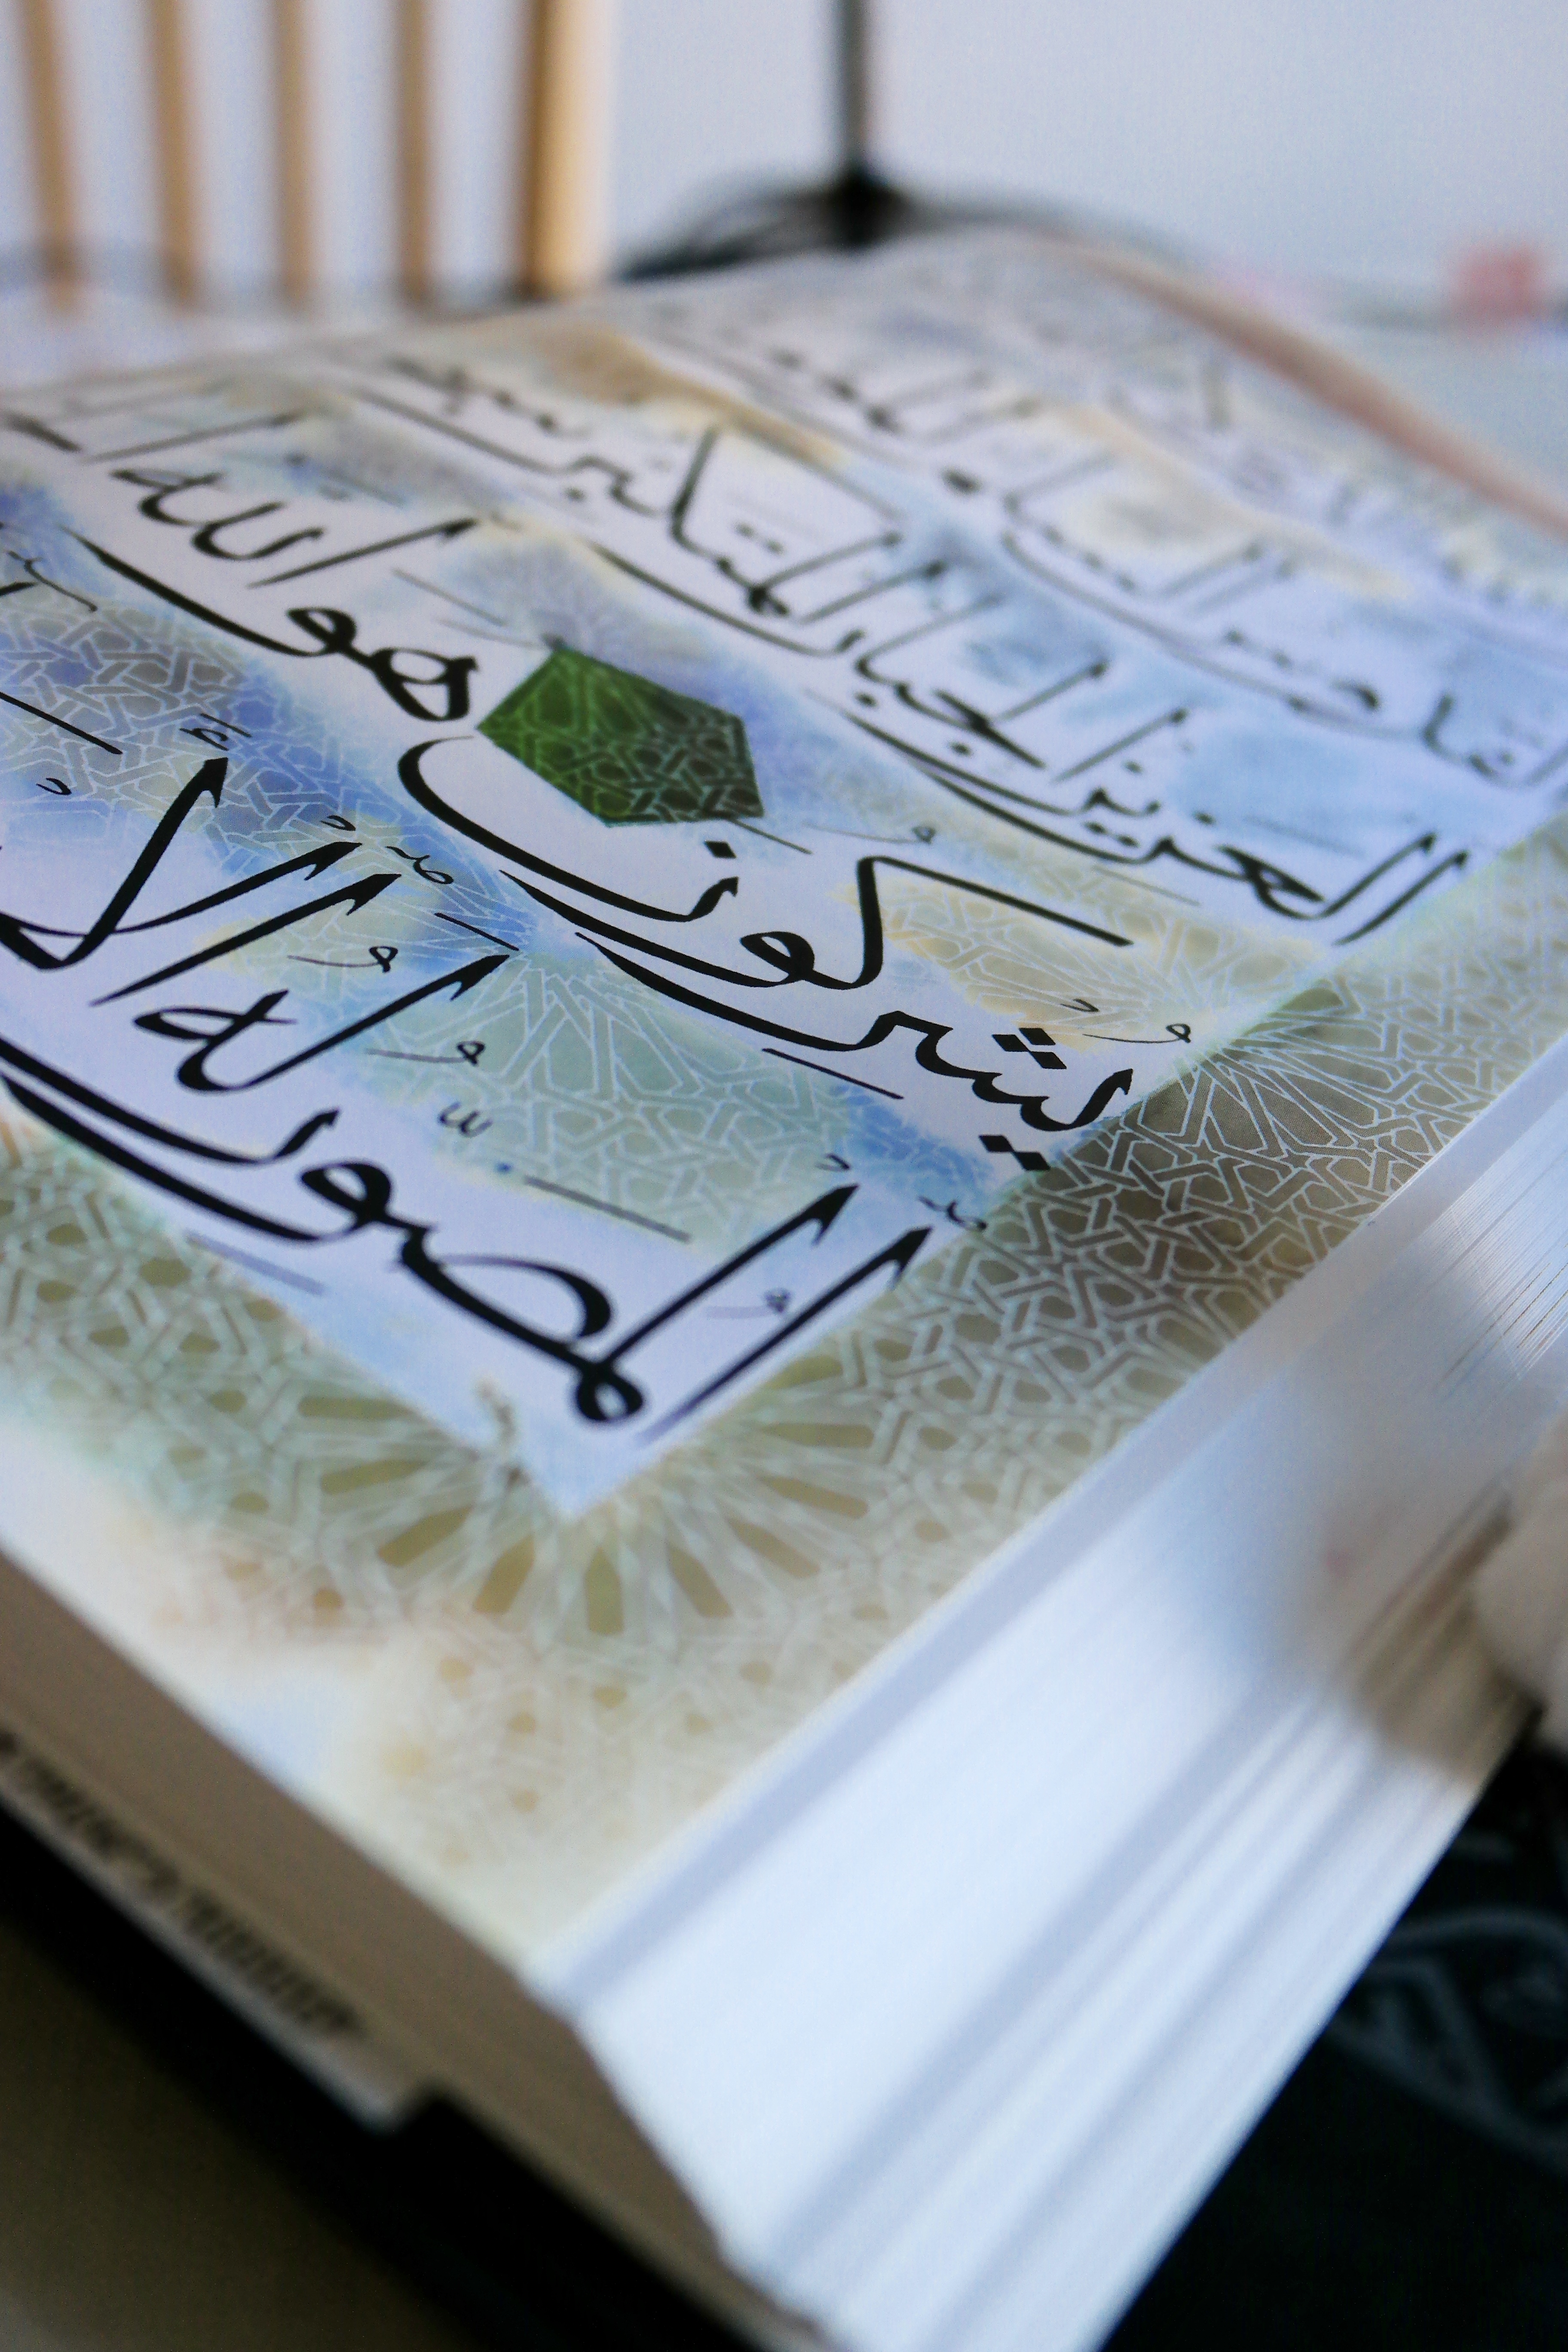 Field Notes for the Millennial Quran Study Project